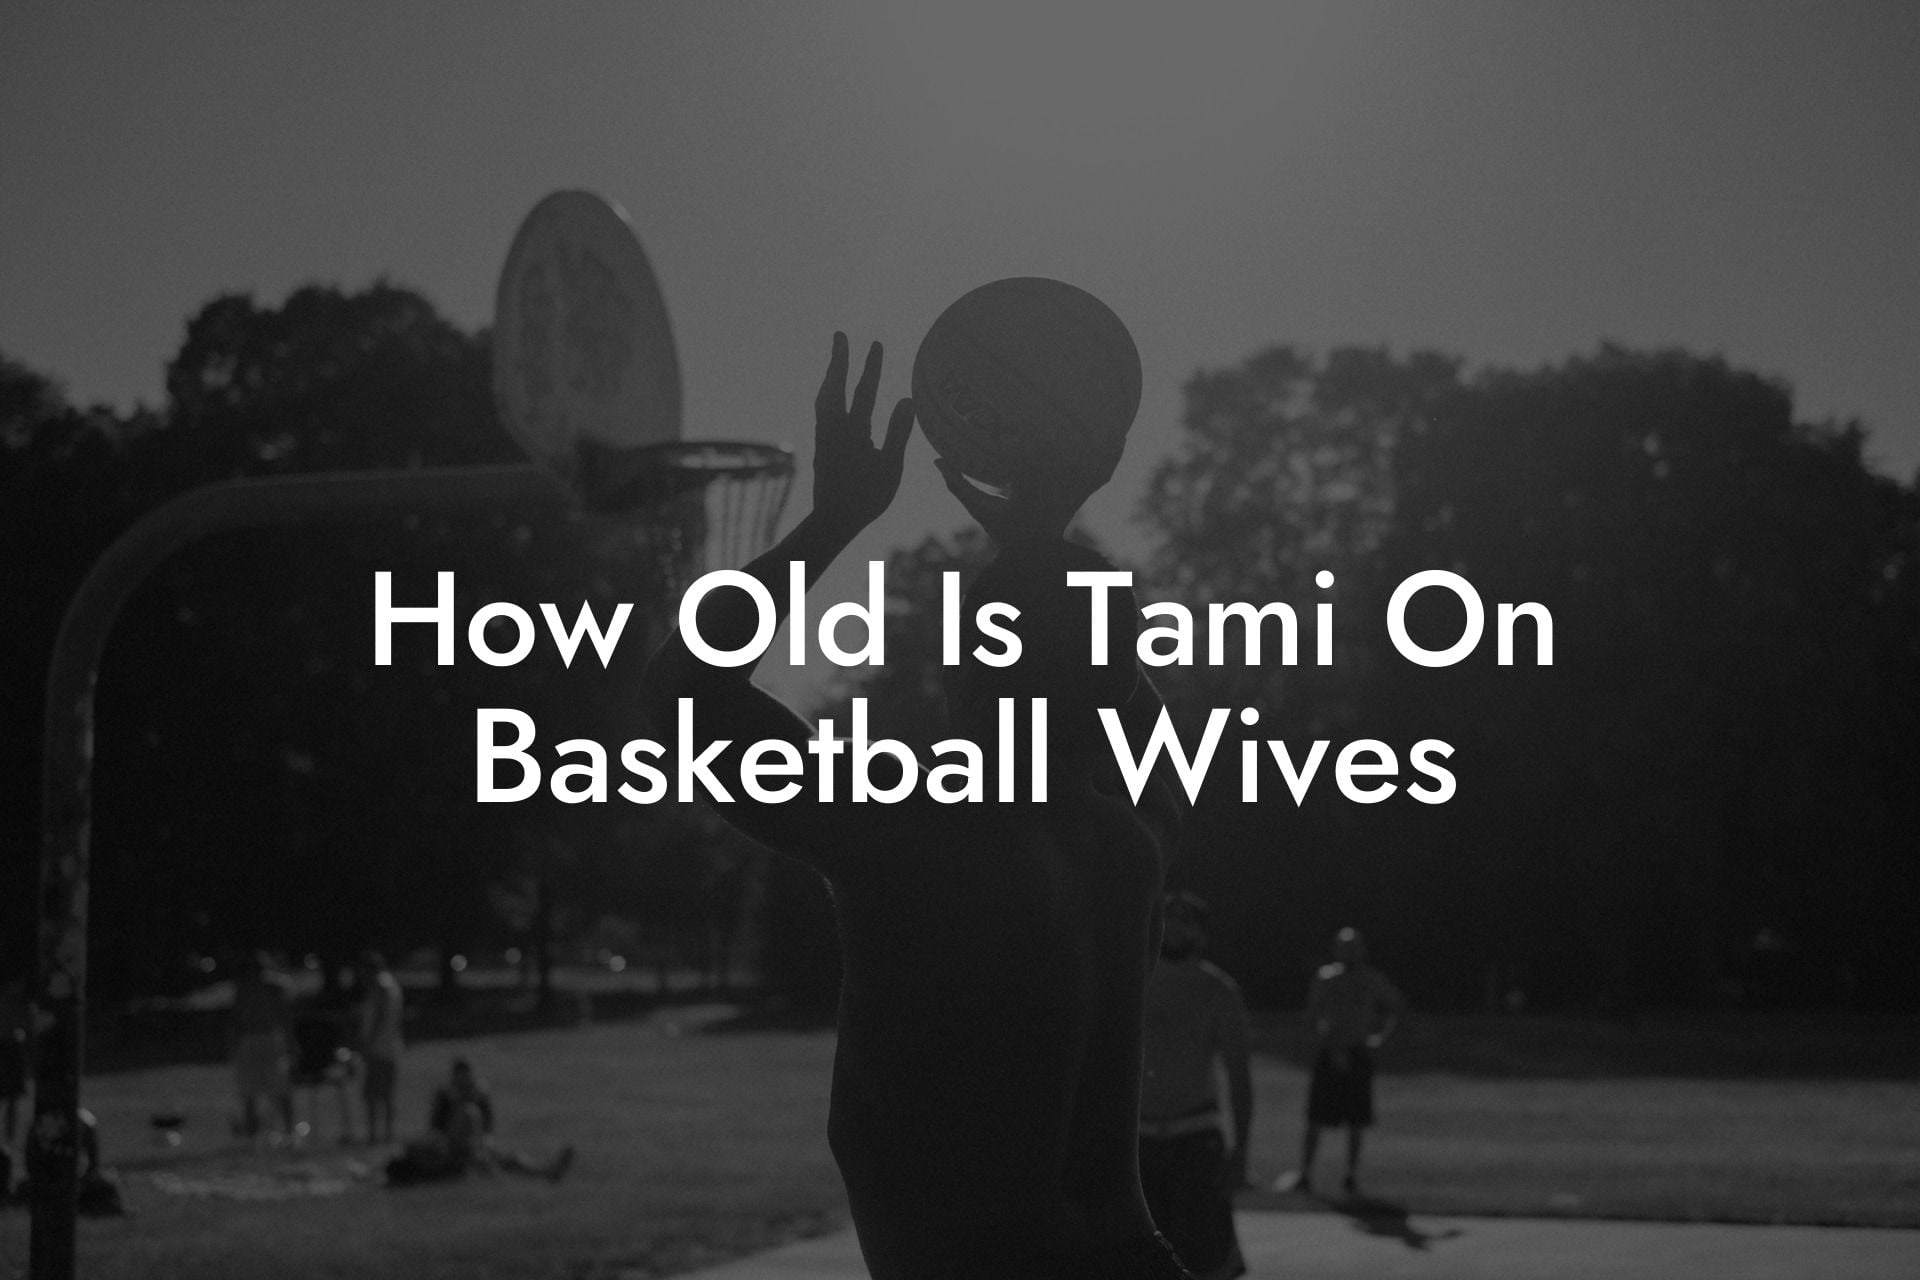 How Old Is Tami On Basketball Wives Triple Threat Tactics Everything Basketball 